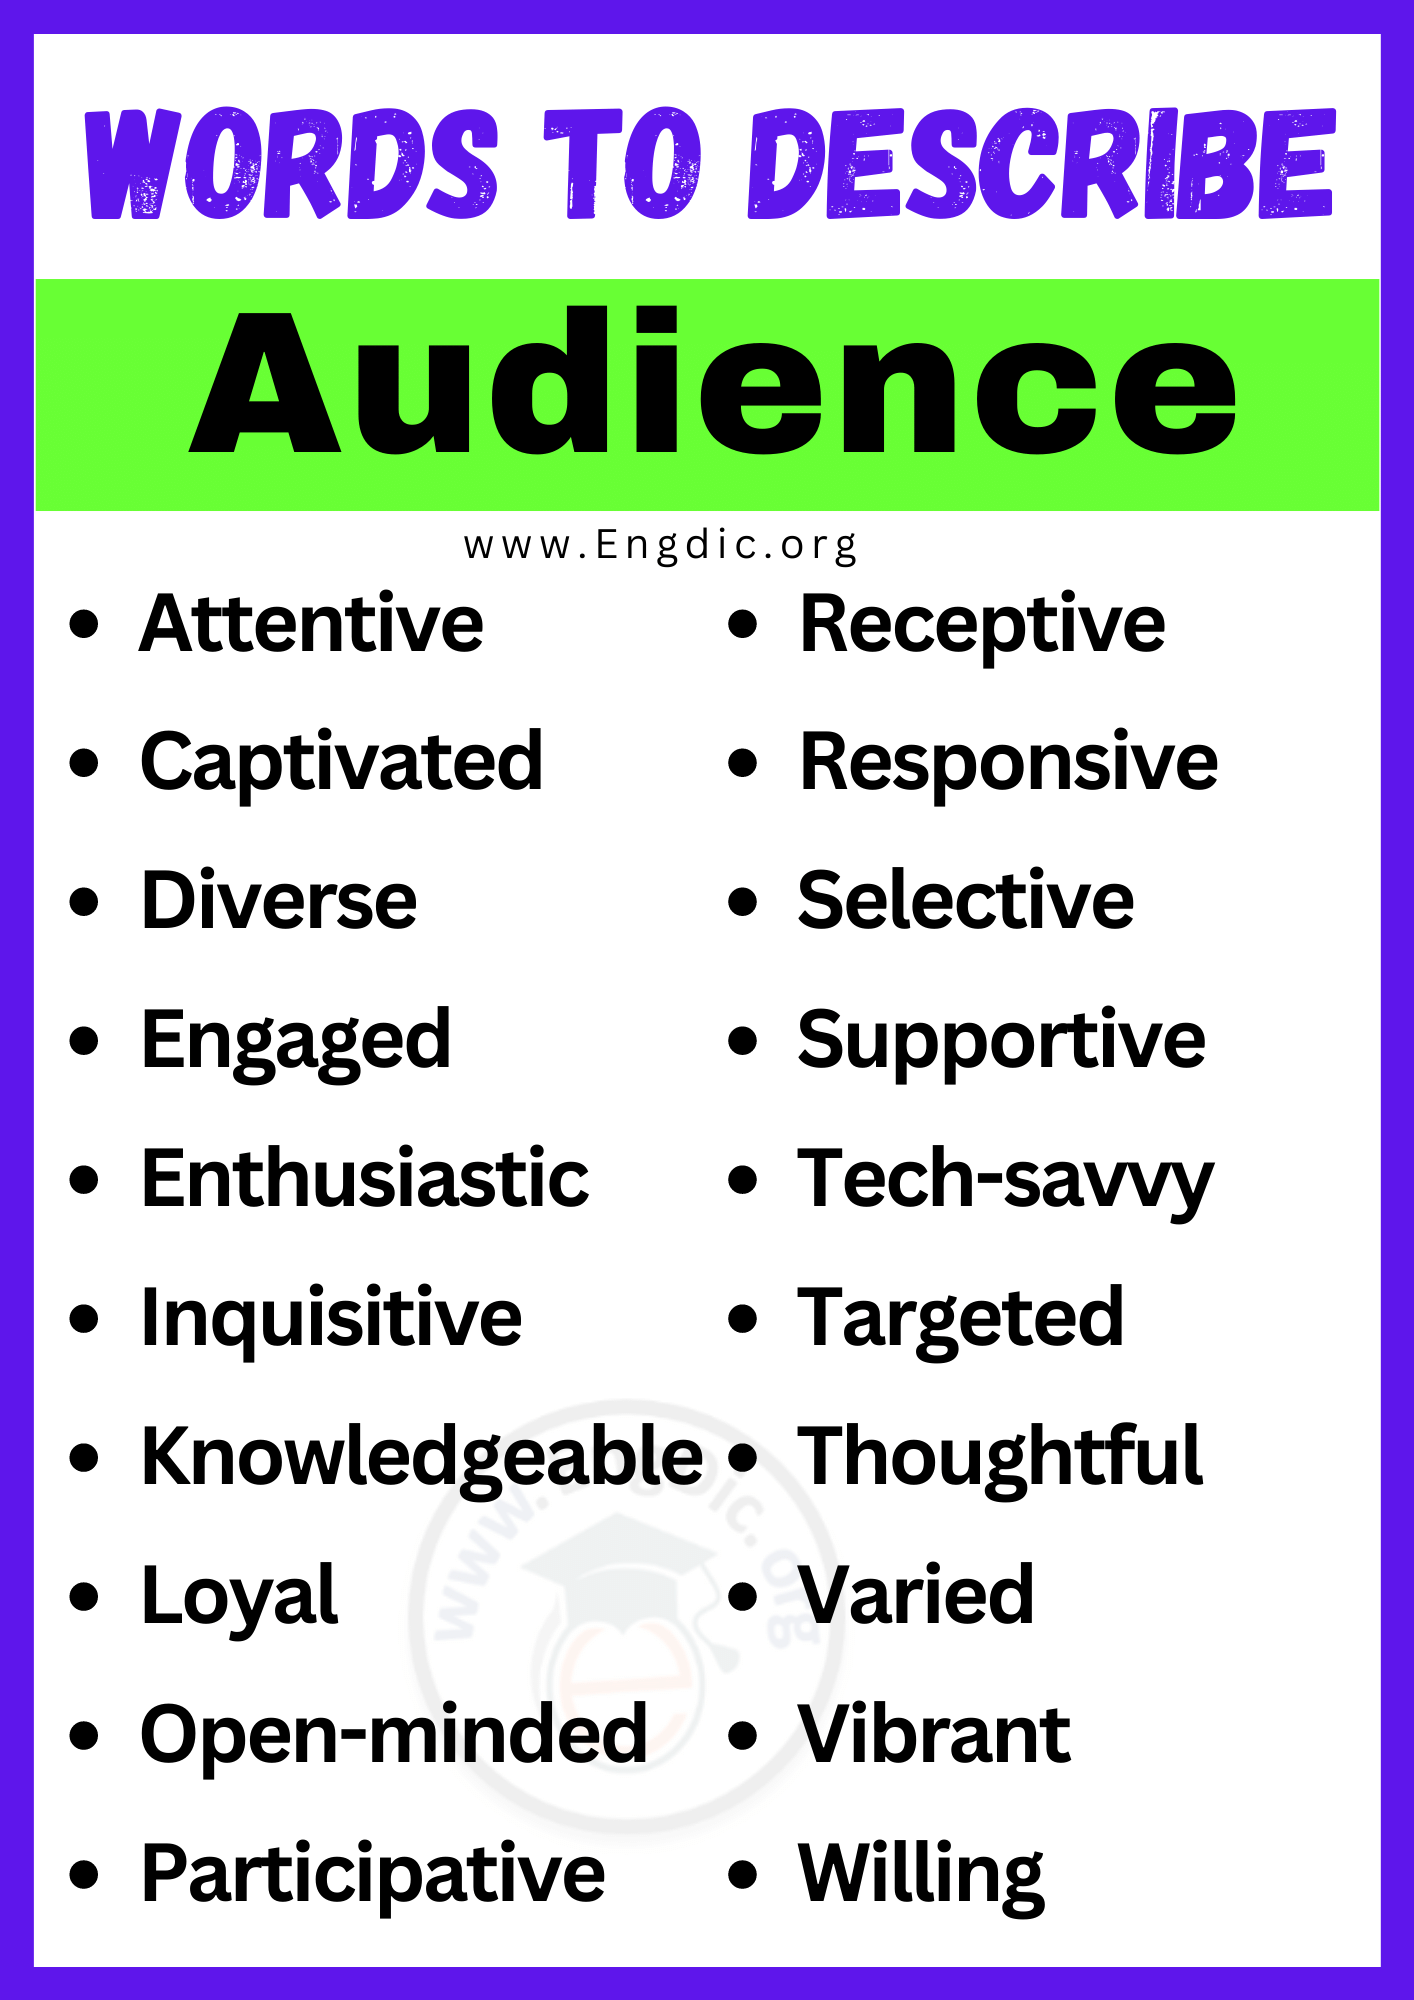 Words to Describe Audience